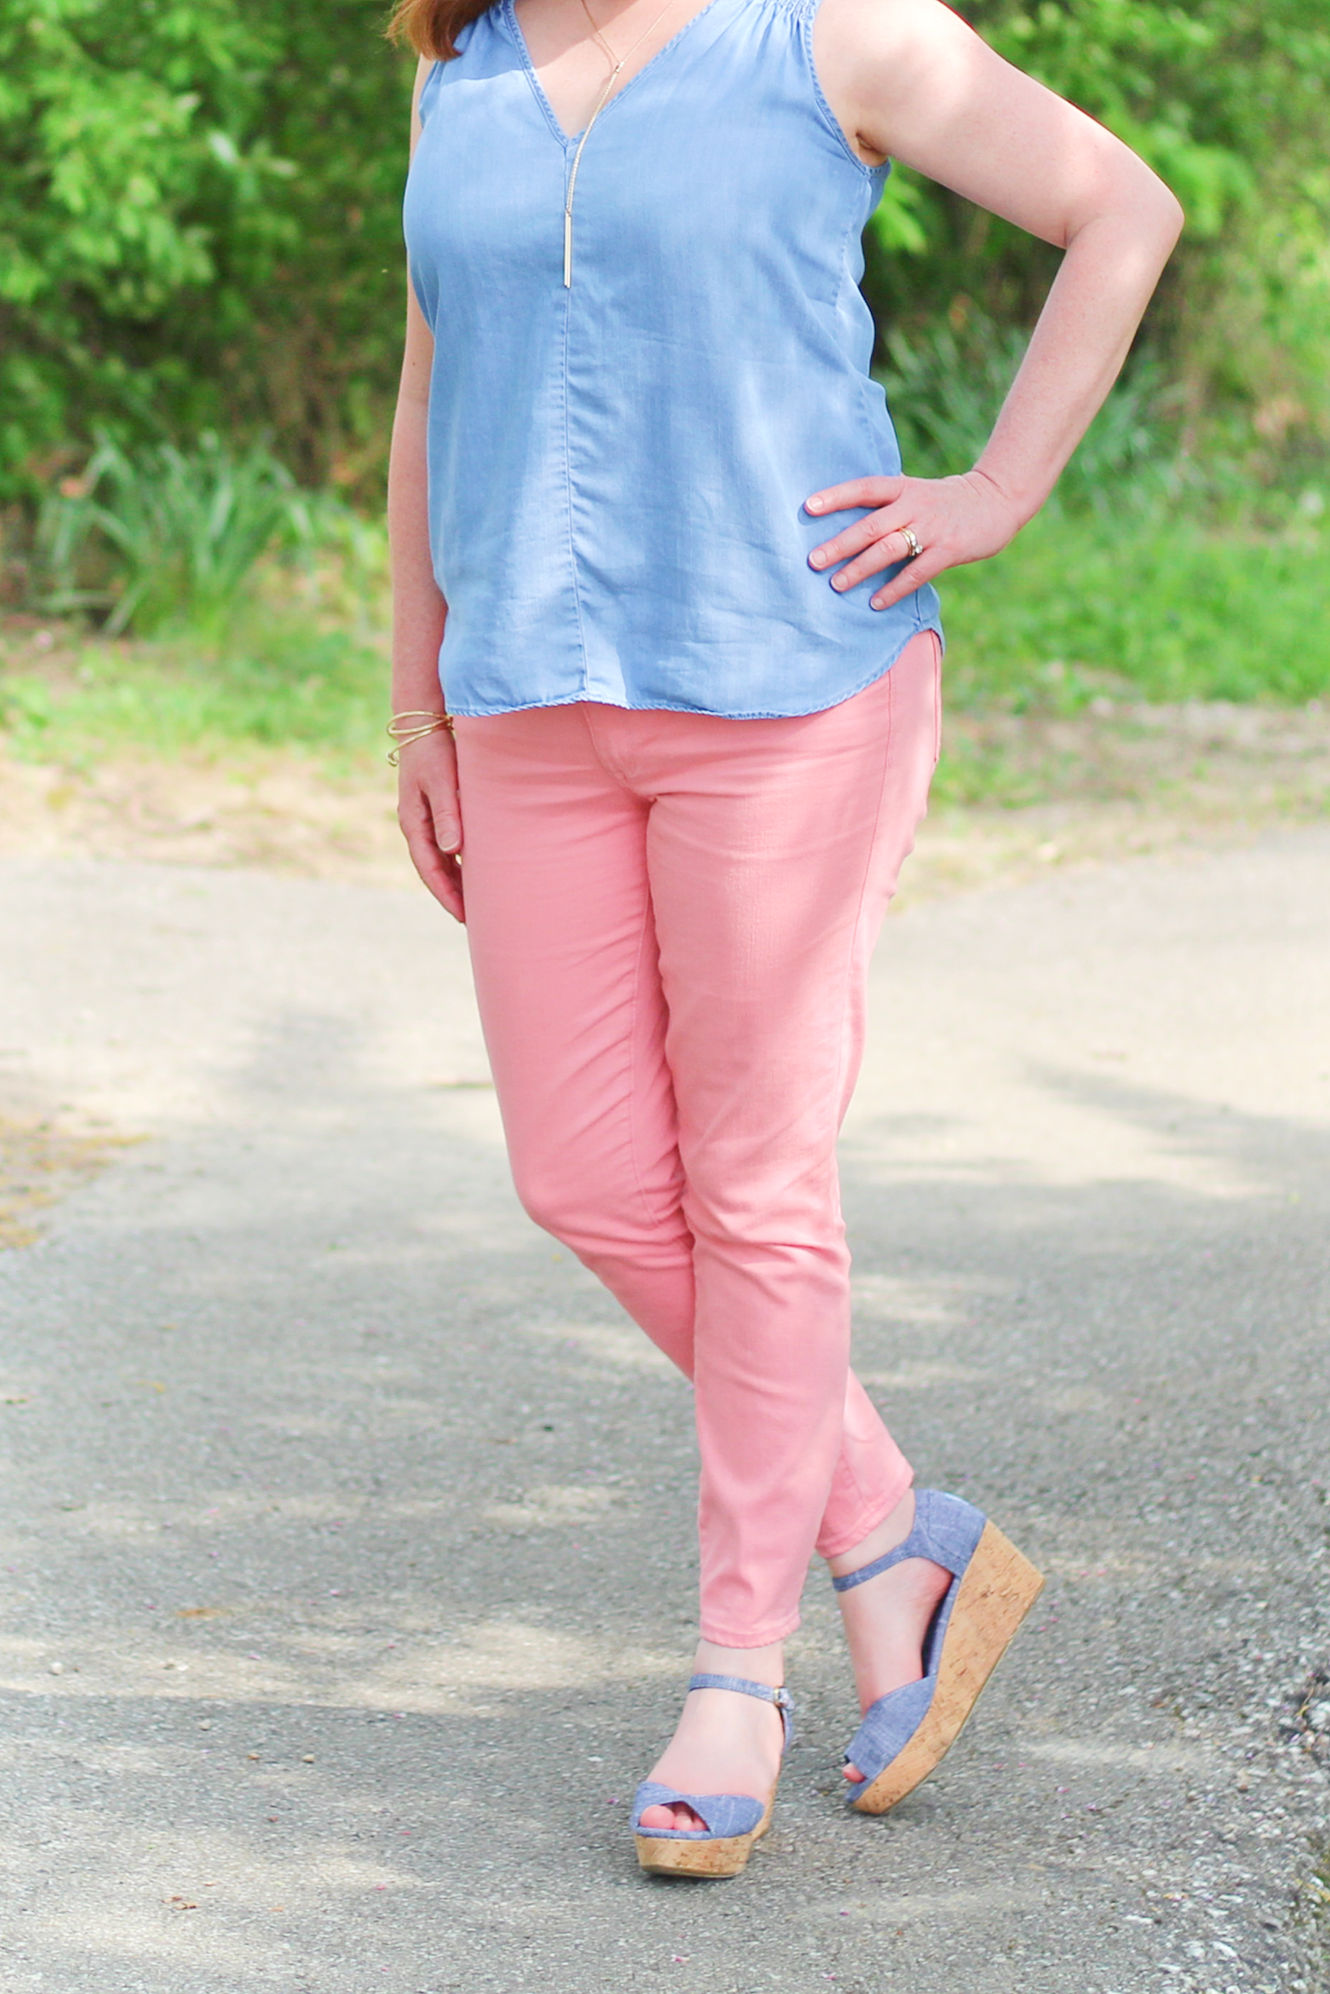 Chambray Top And Pink Jeans 